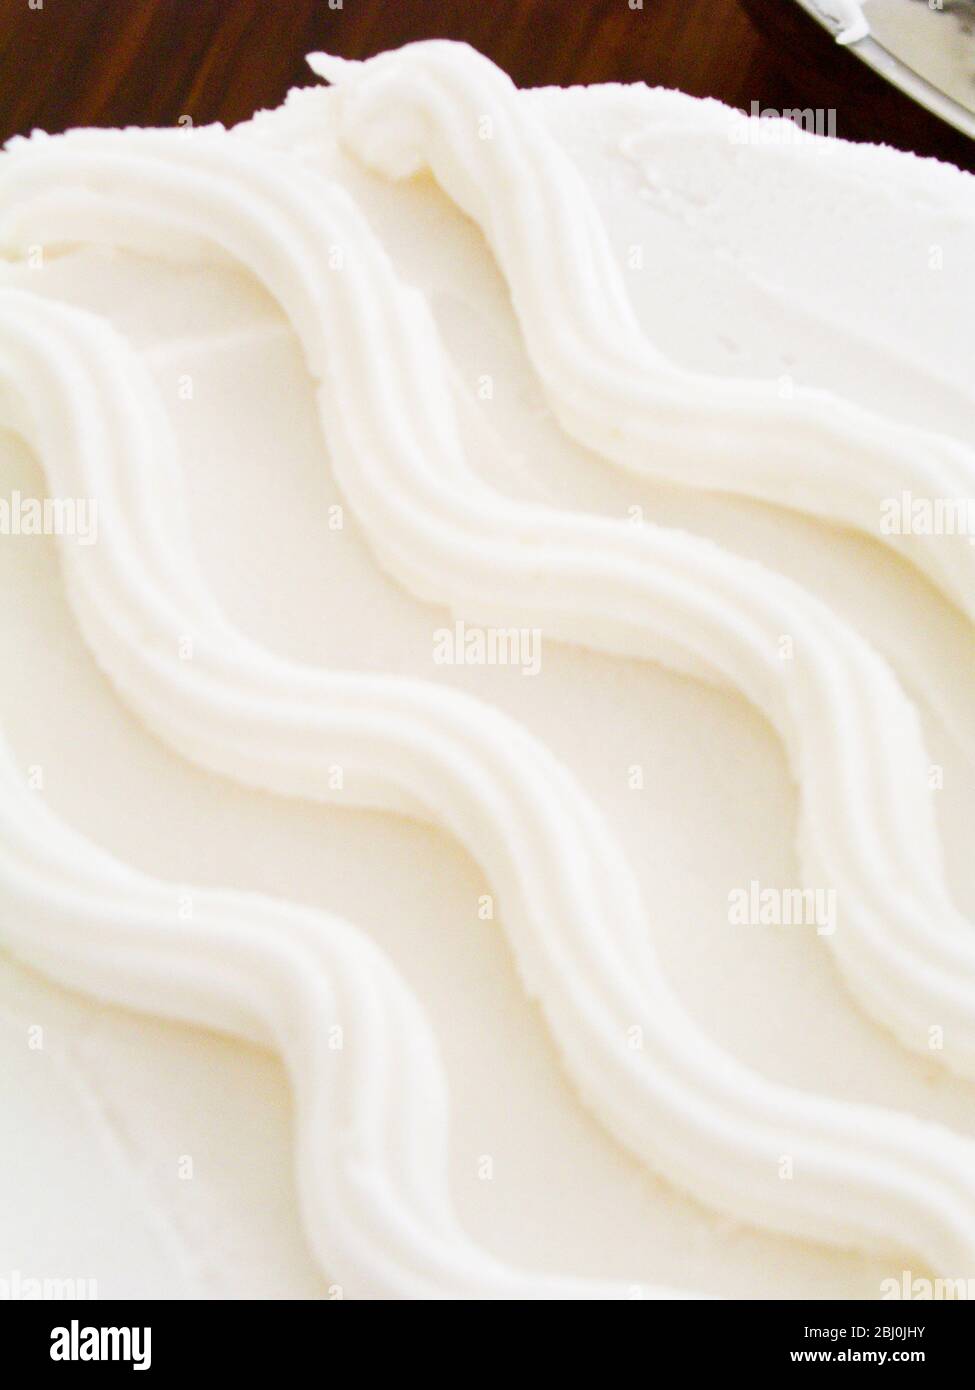 Detail of simple wavy design on iced cake - Stock Photo